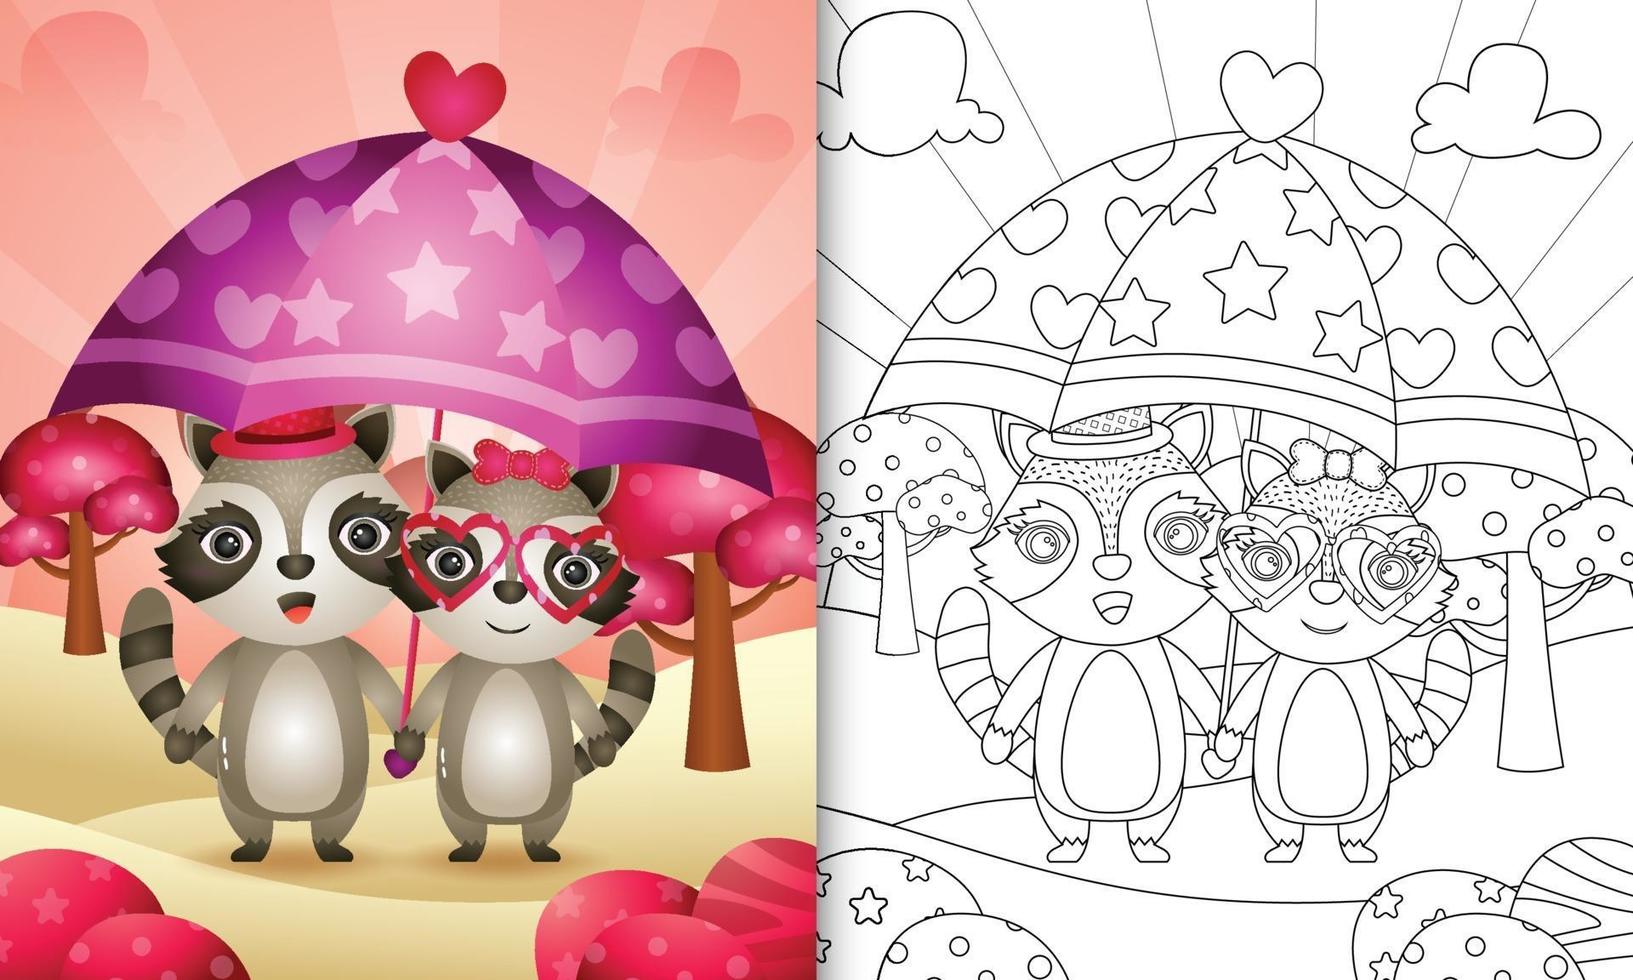 coloring book for kids with a cute raccoon couple holding umbrella themed valentine day vector